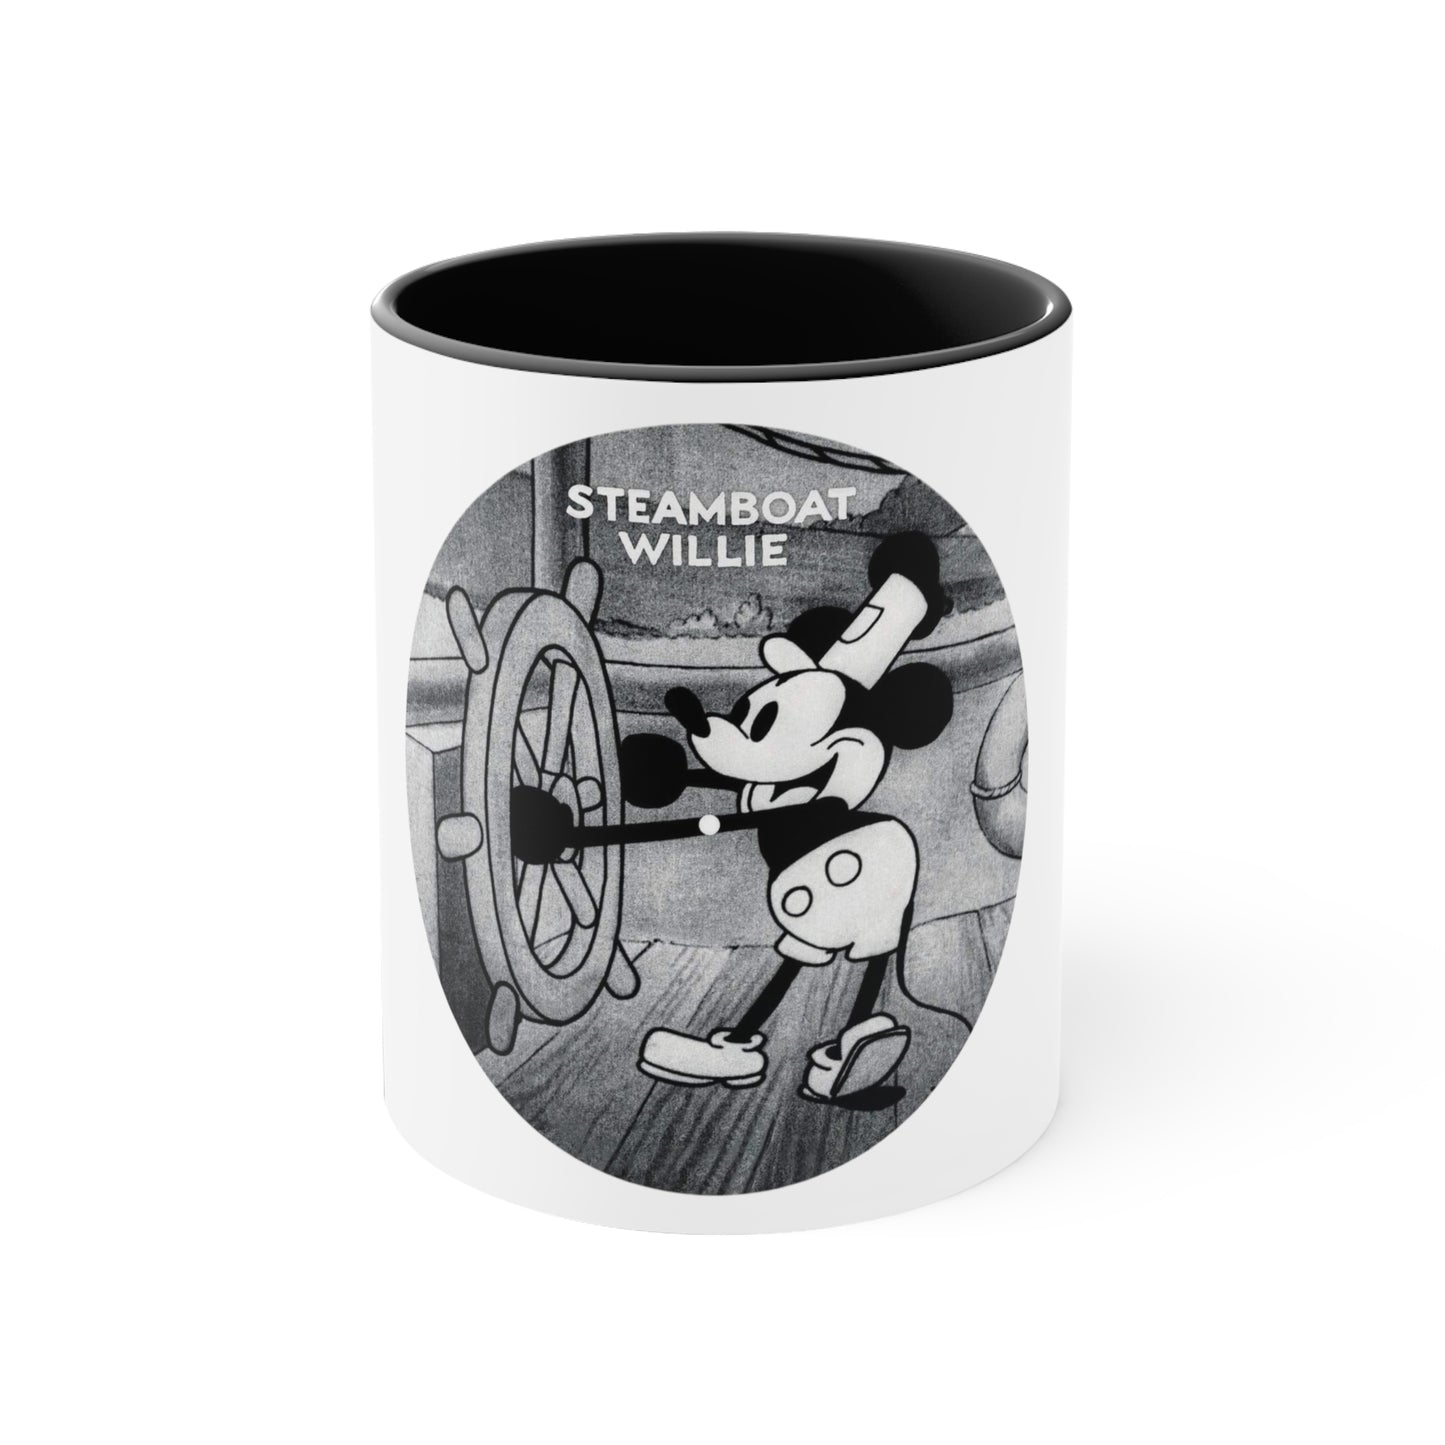 "Steamboat Willie" Accent Coffee Mug, 11oz, Choose Your Colored Interior and Handle